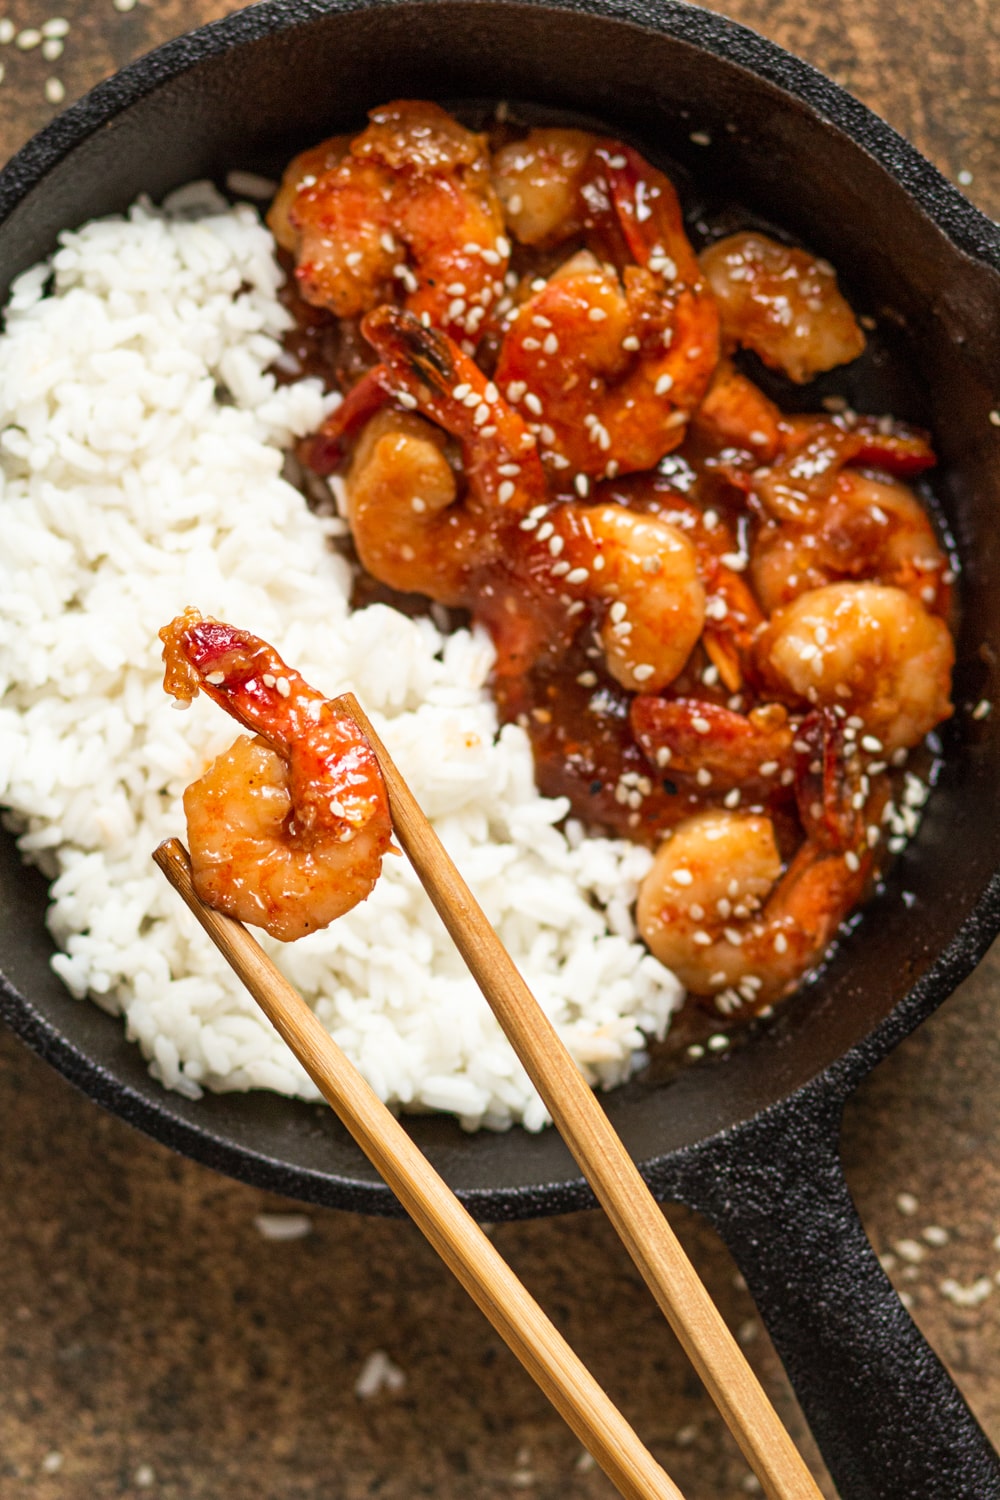 An overhead view of a skillet half filled with white rice on the left and half filled with firecracker shrimp on the right. One shrimp is being held between a pair of chopsticks over the rice.